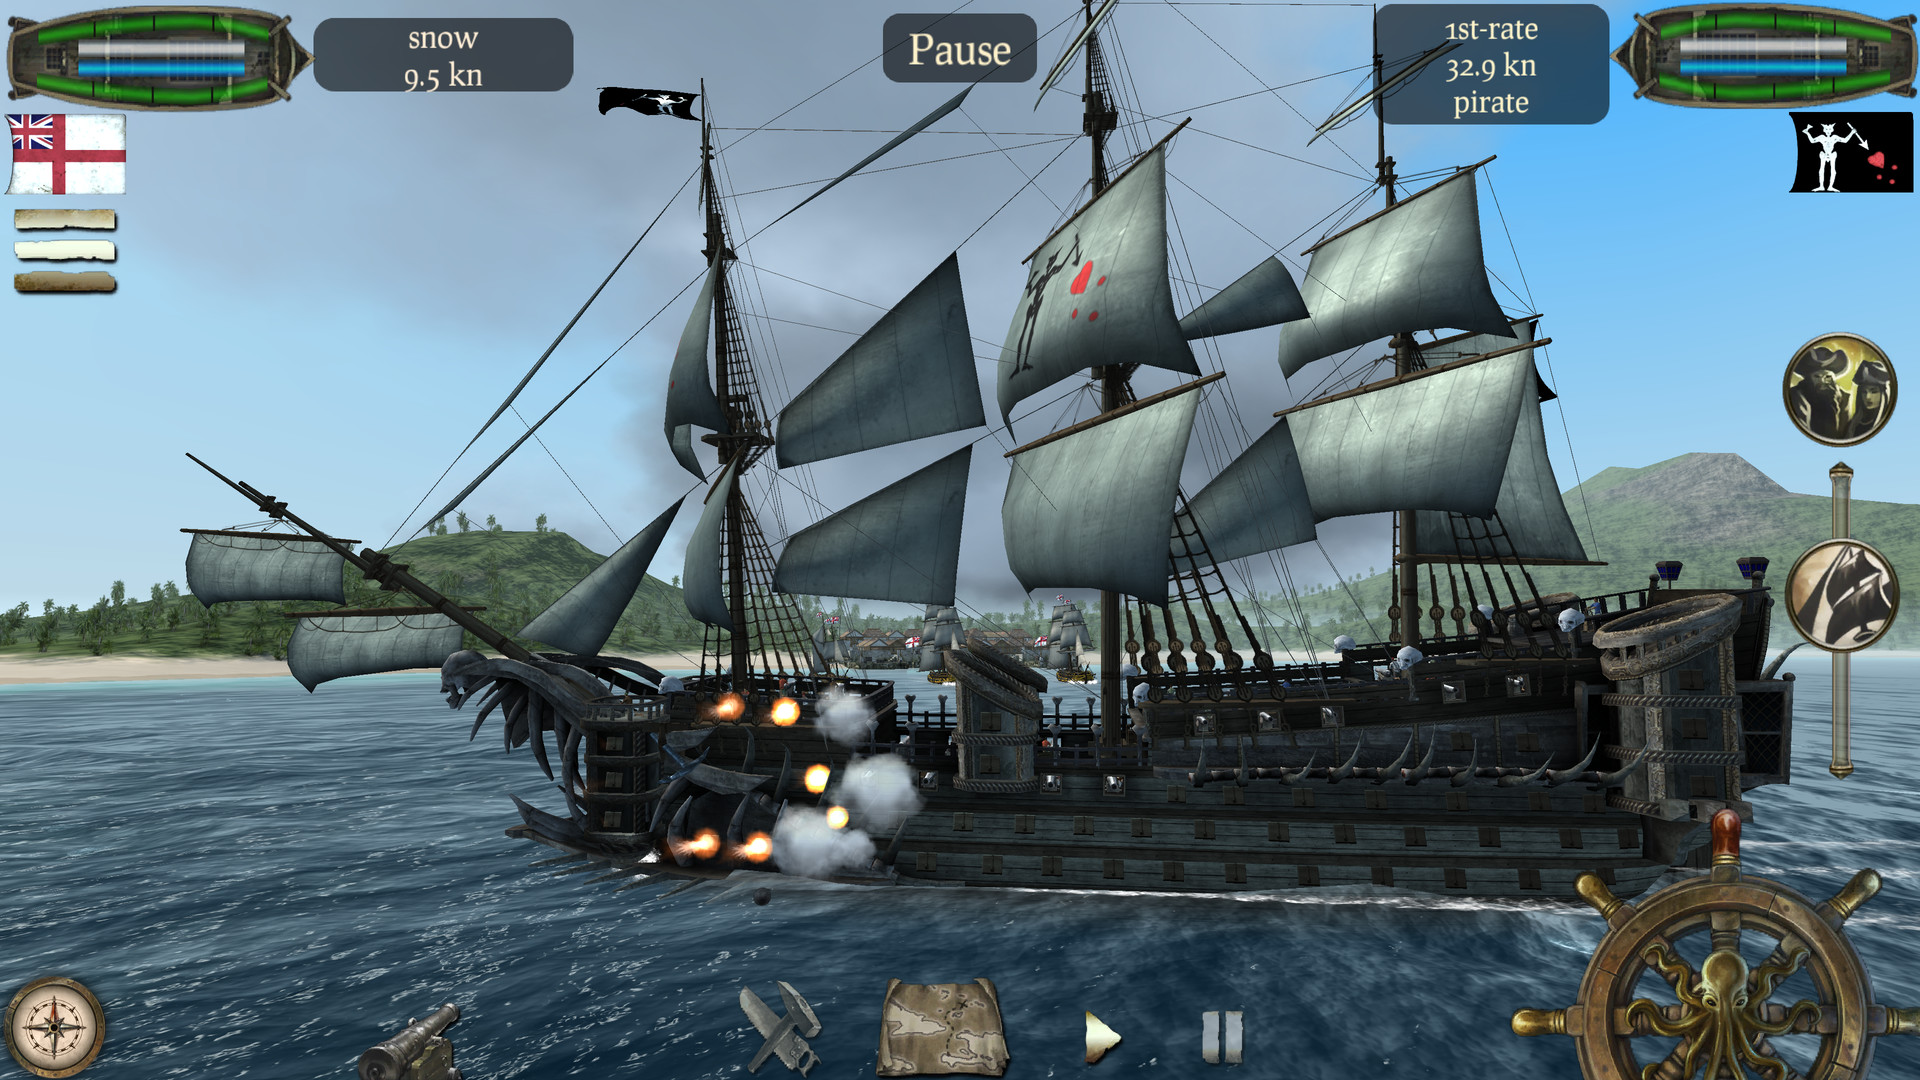 The Pirate: Plague of the Dead no Steam